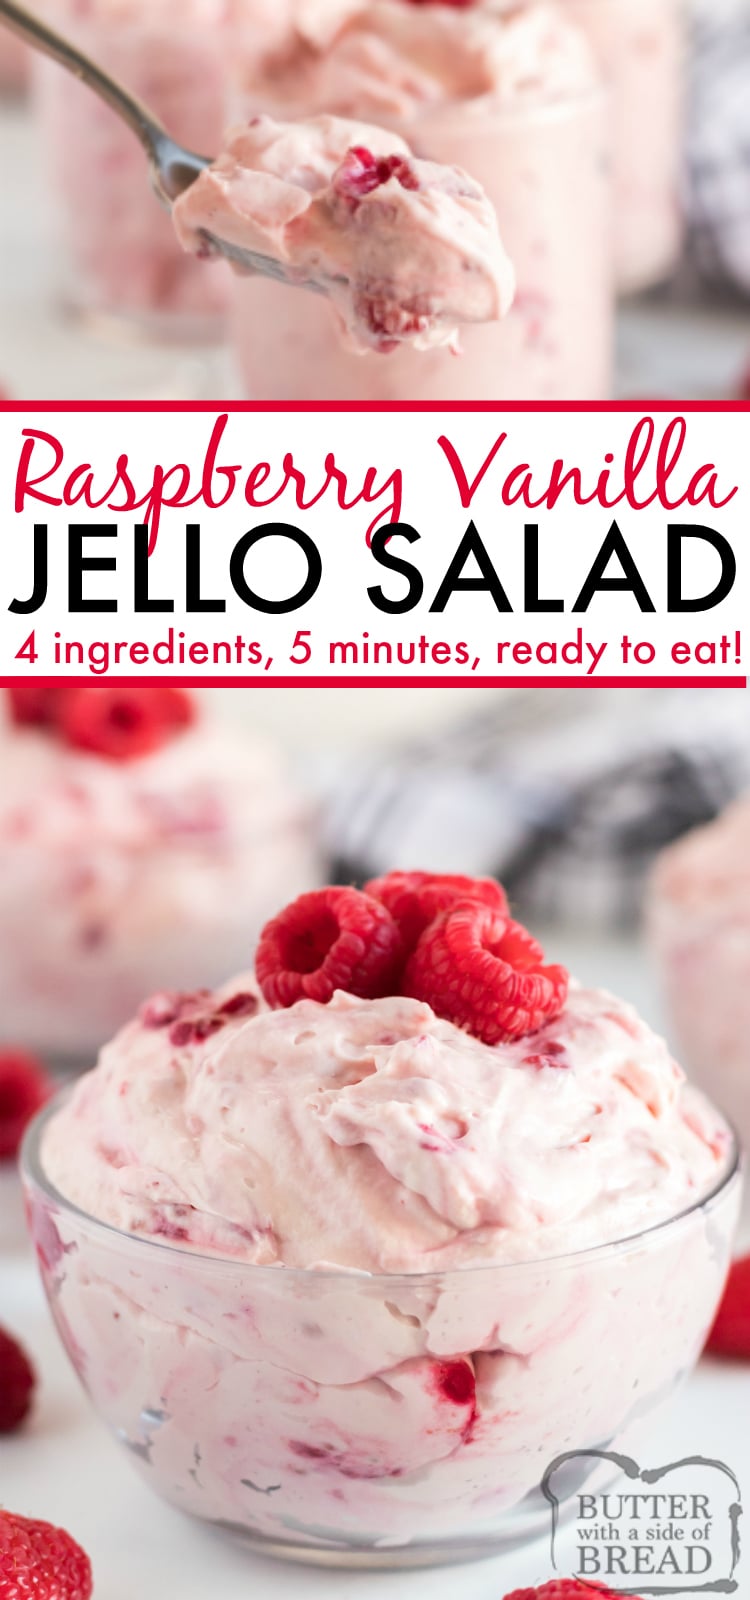 Raspberry Vanilla Jello Salad is one of the easiest jello recipes you will ever make and it is perfect as a side dish or a dessert. This recipe only requires 4 ingredients and 5 minutes to make and then it is immediately ready to serve!